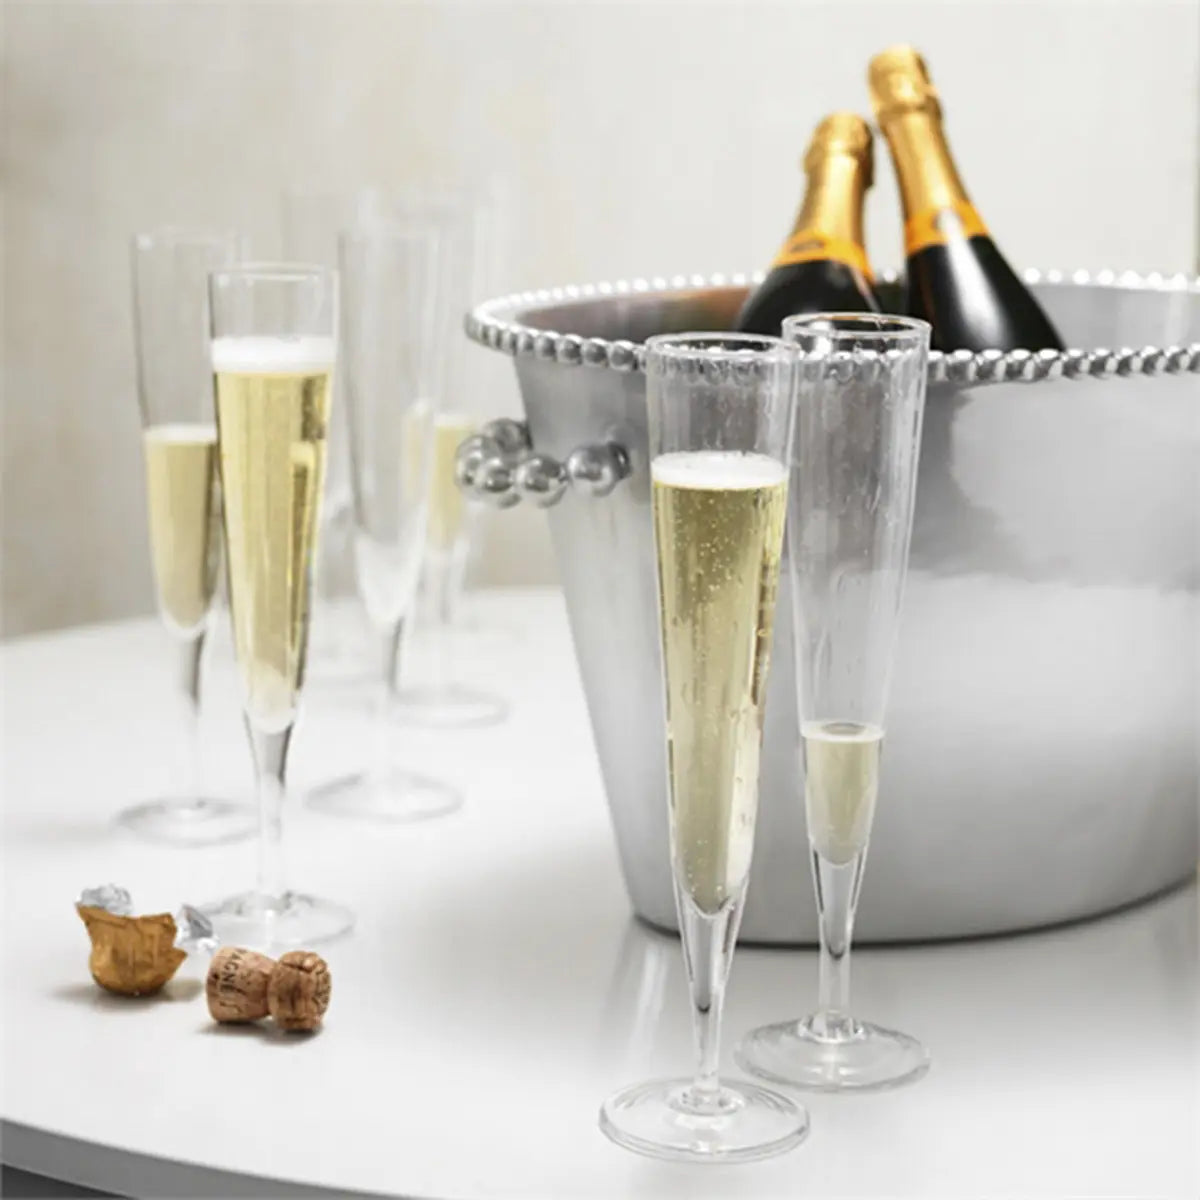 Mariposa Bellini Champagne Flute filled with Champagne next to a ice bucket on a table